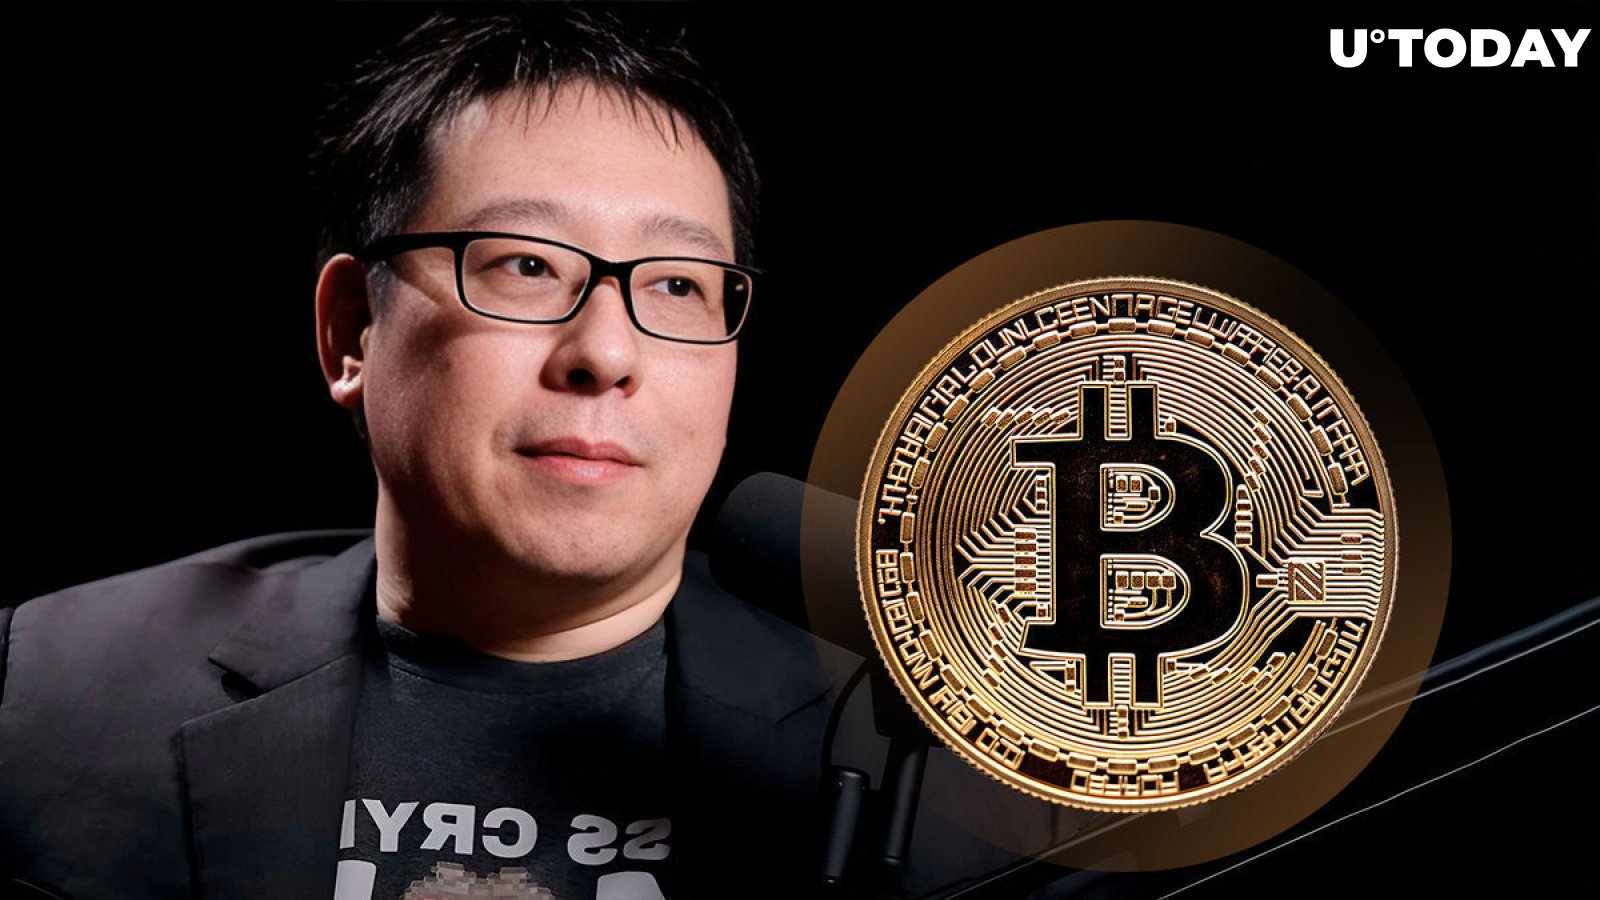 Crucial Bitcoin Statement Issued by Samson Mow: 'Supply Will Never Meet Demand'